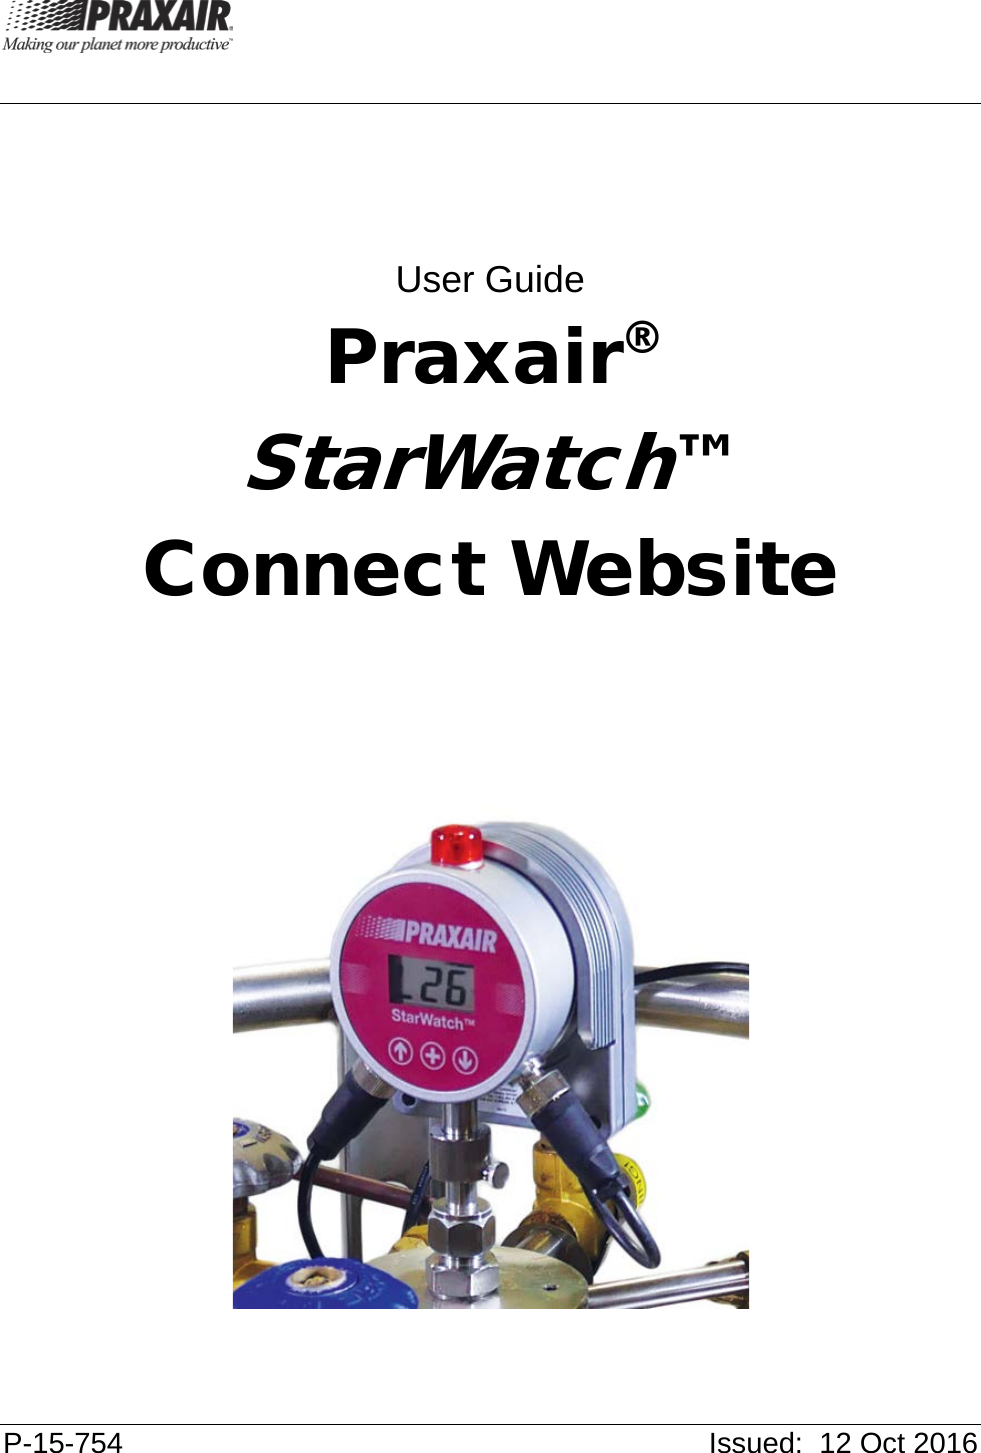  P-15-754    Issued:  12 Oct 2016         User Guide Praxair®  StarWatch™  Connect Website     